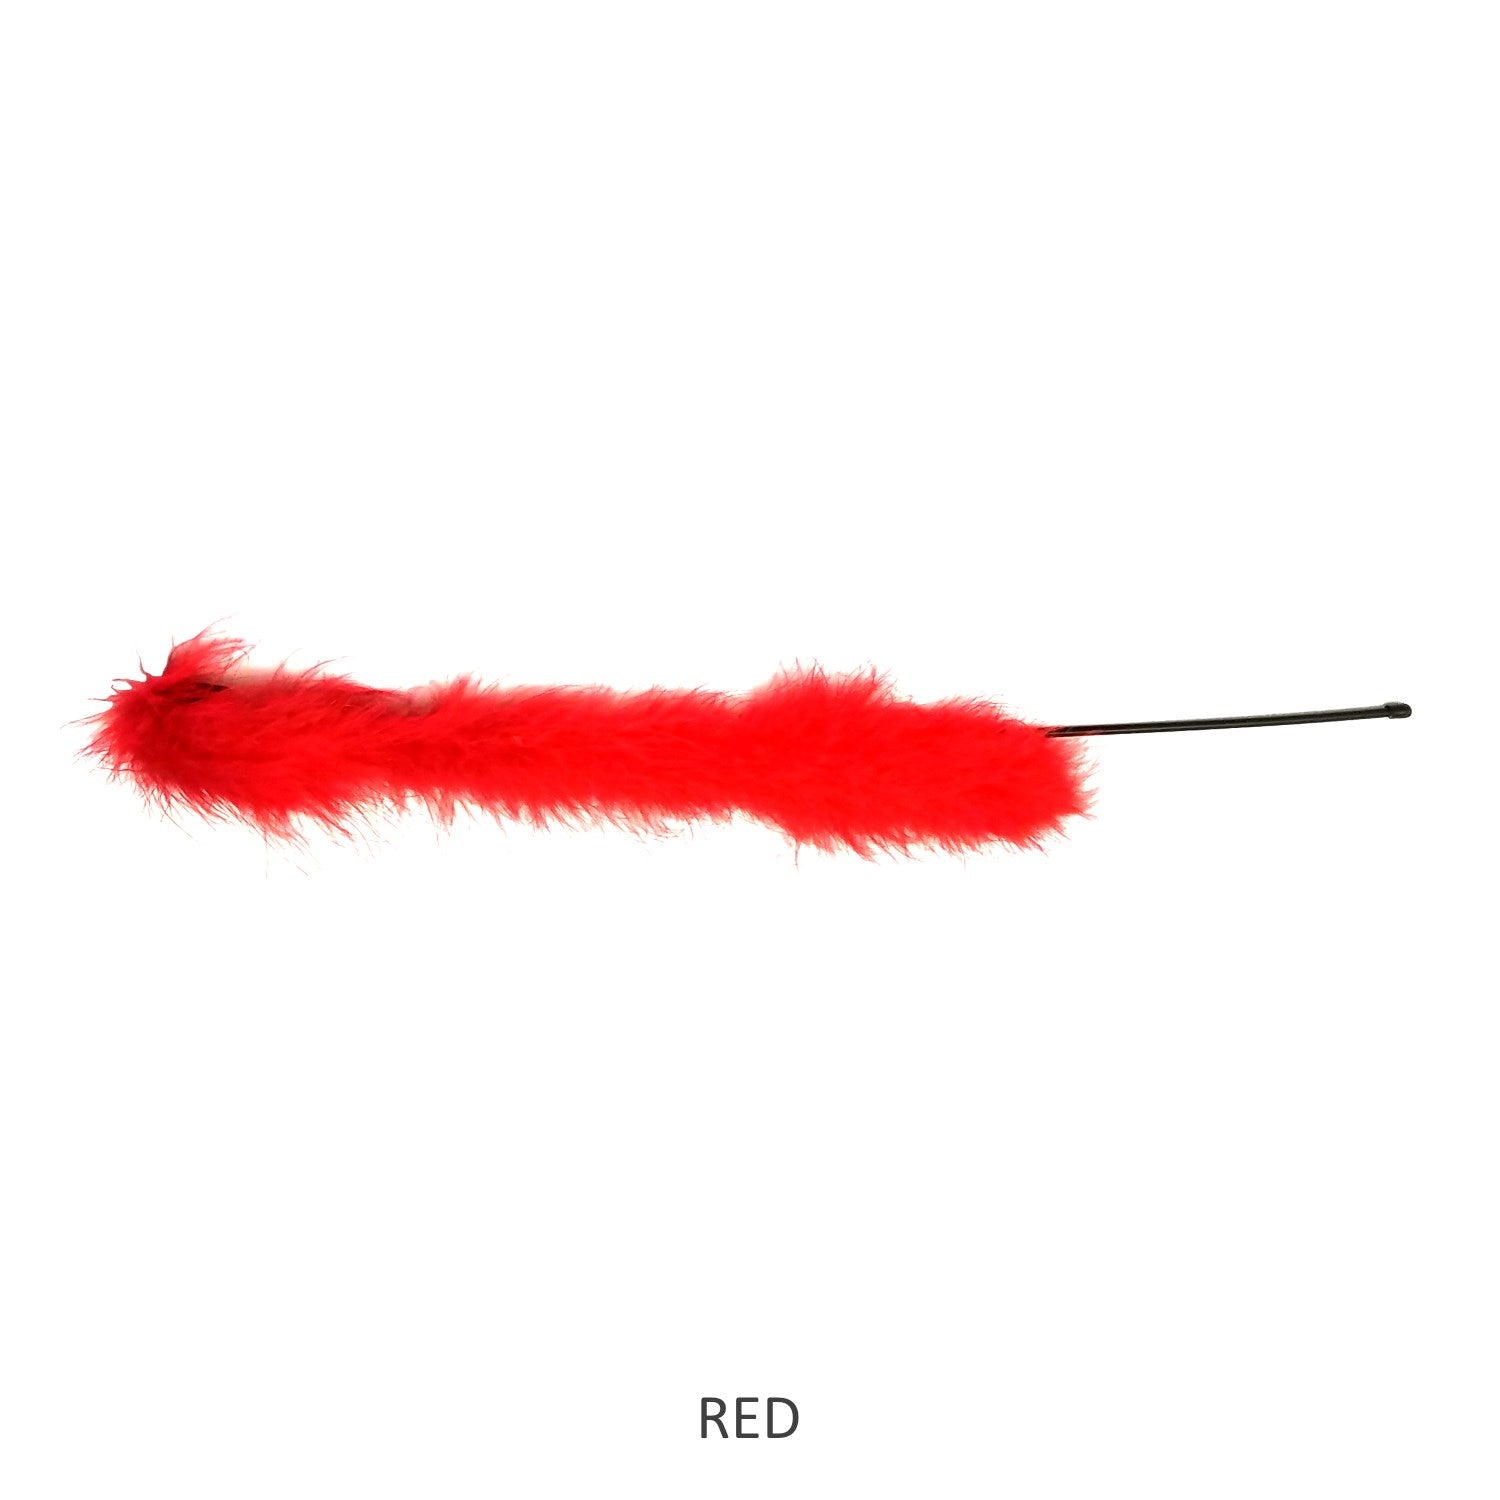 Maribou Feather Pole Toy